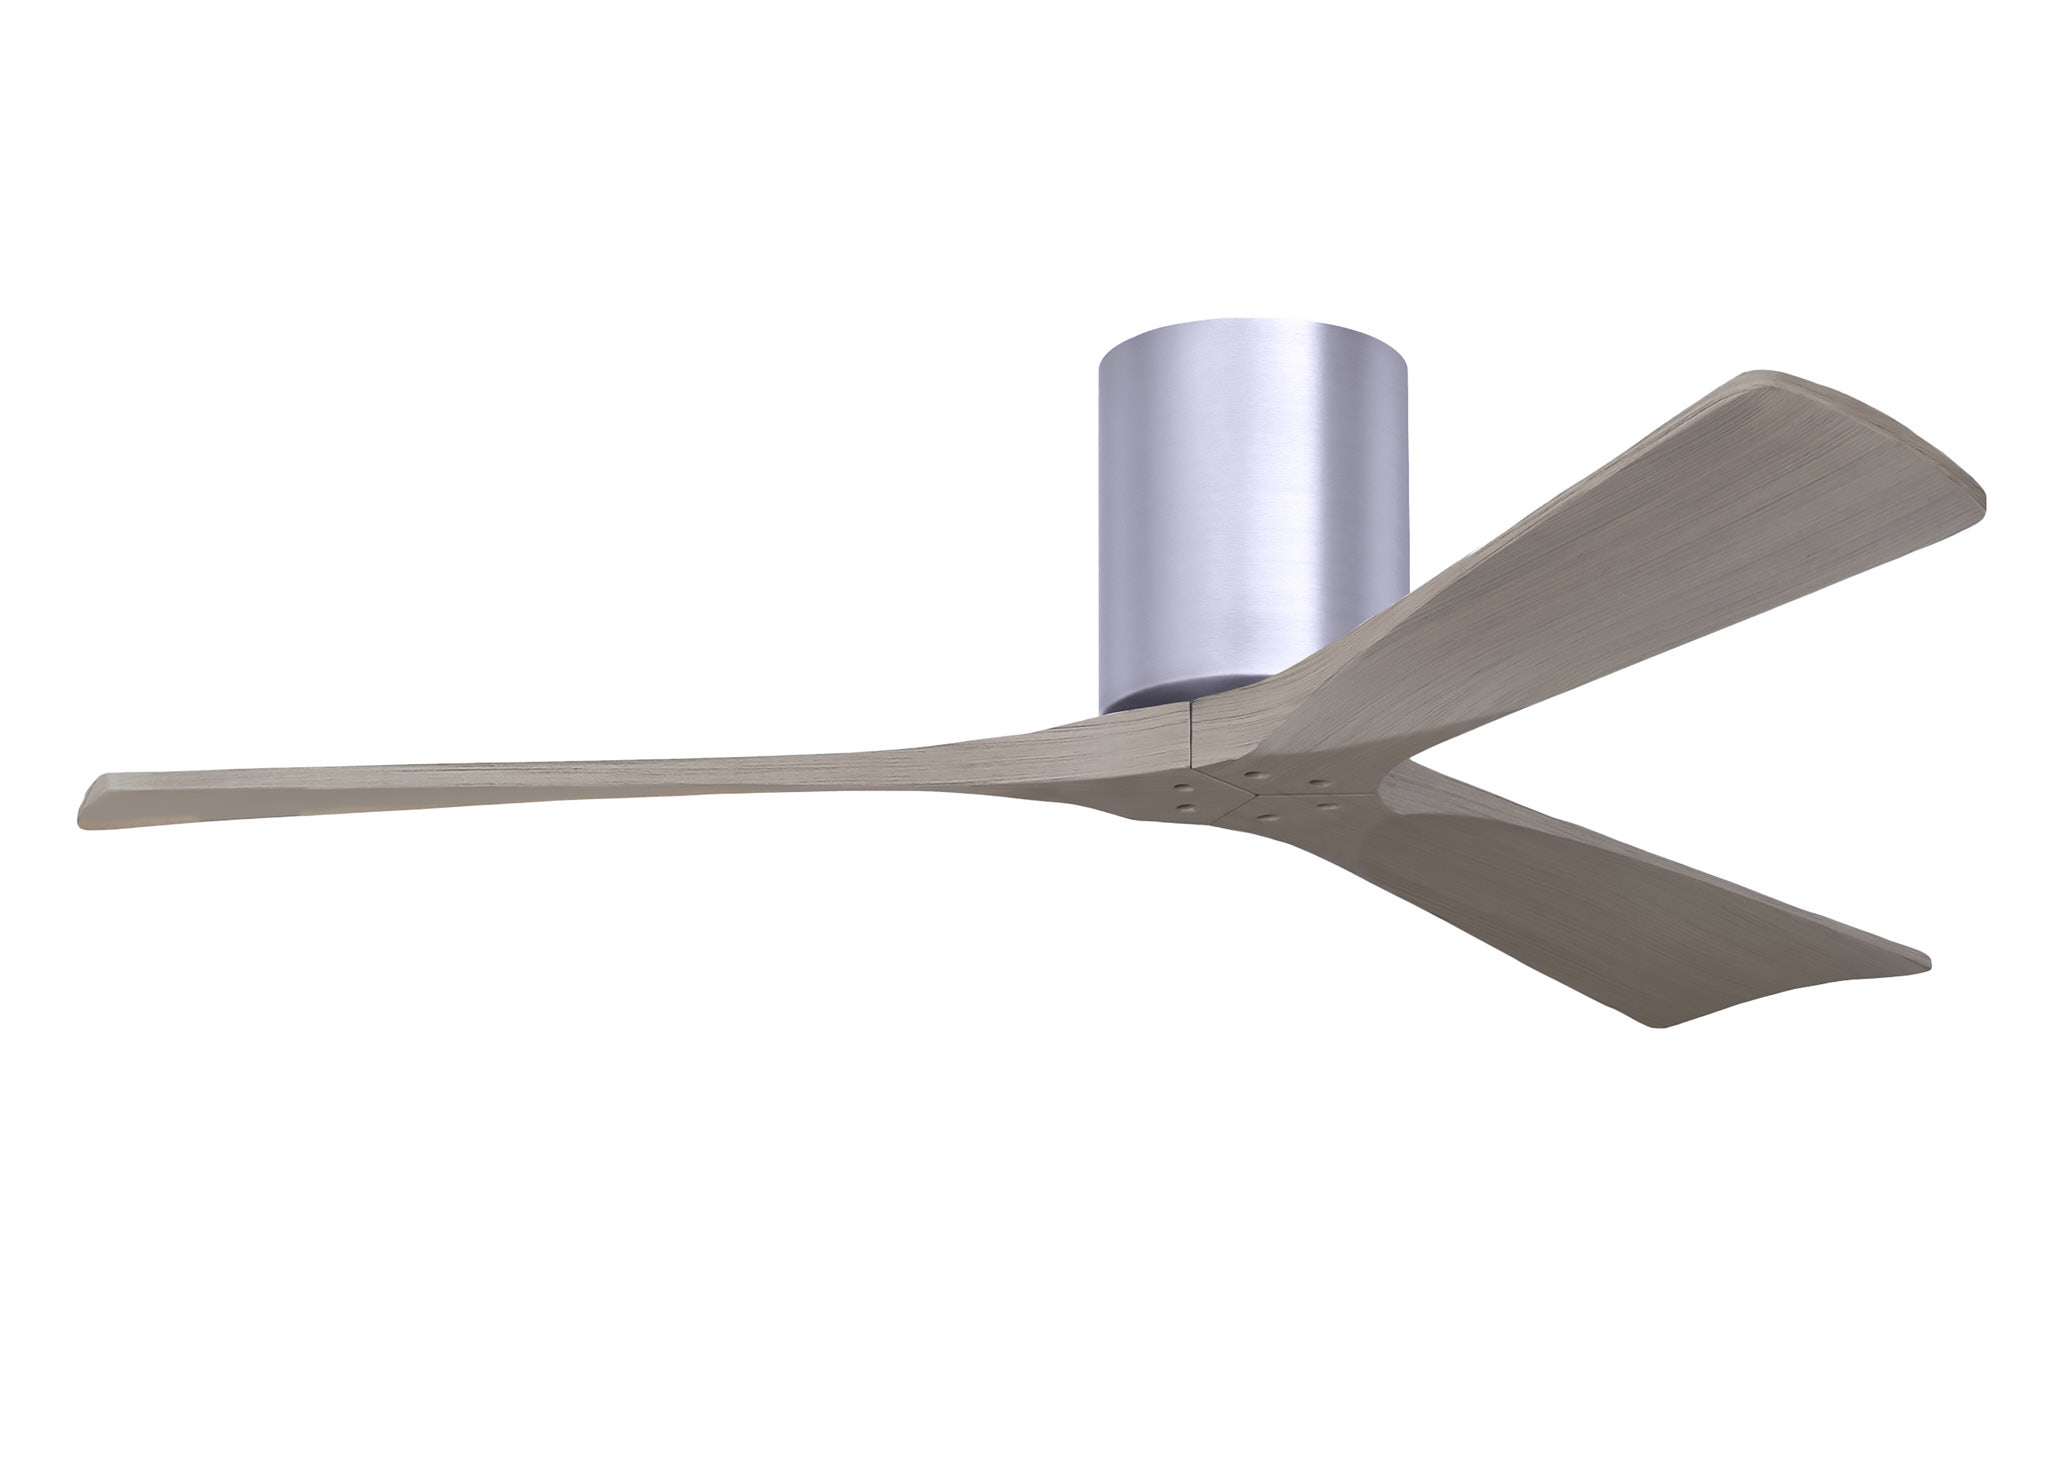 Irene-3H 6-speed ceiling fan in brushed nickel finish with 52